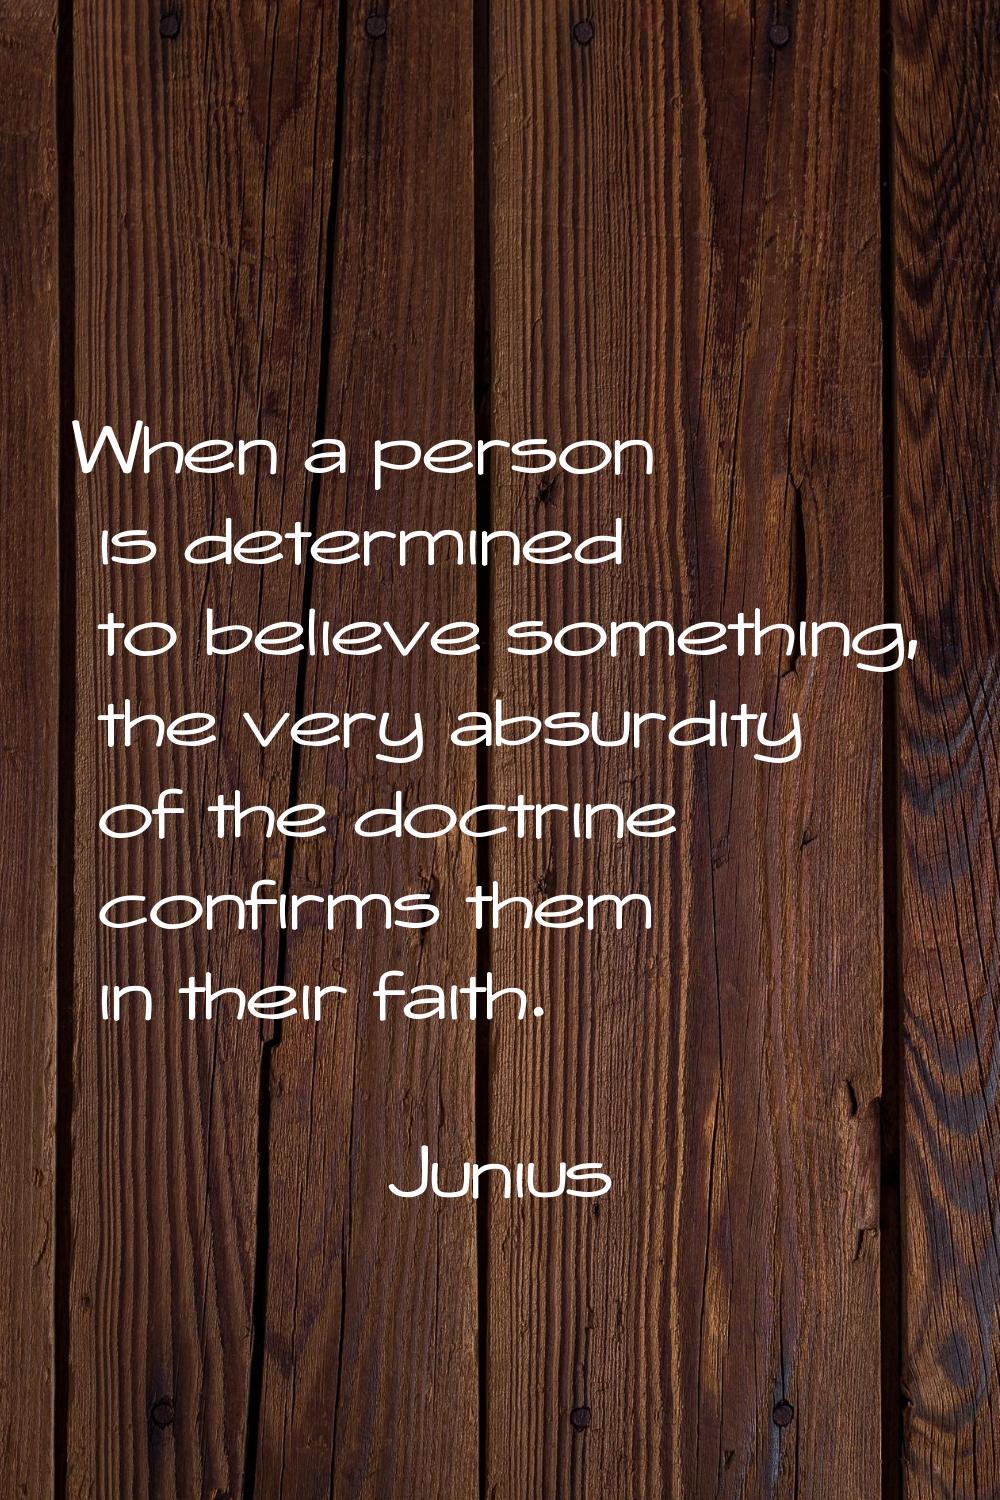 When a person is determined to believe something, the very absurdity of the doctrine confirms them 